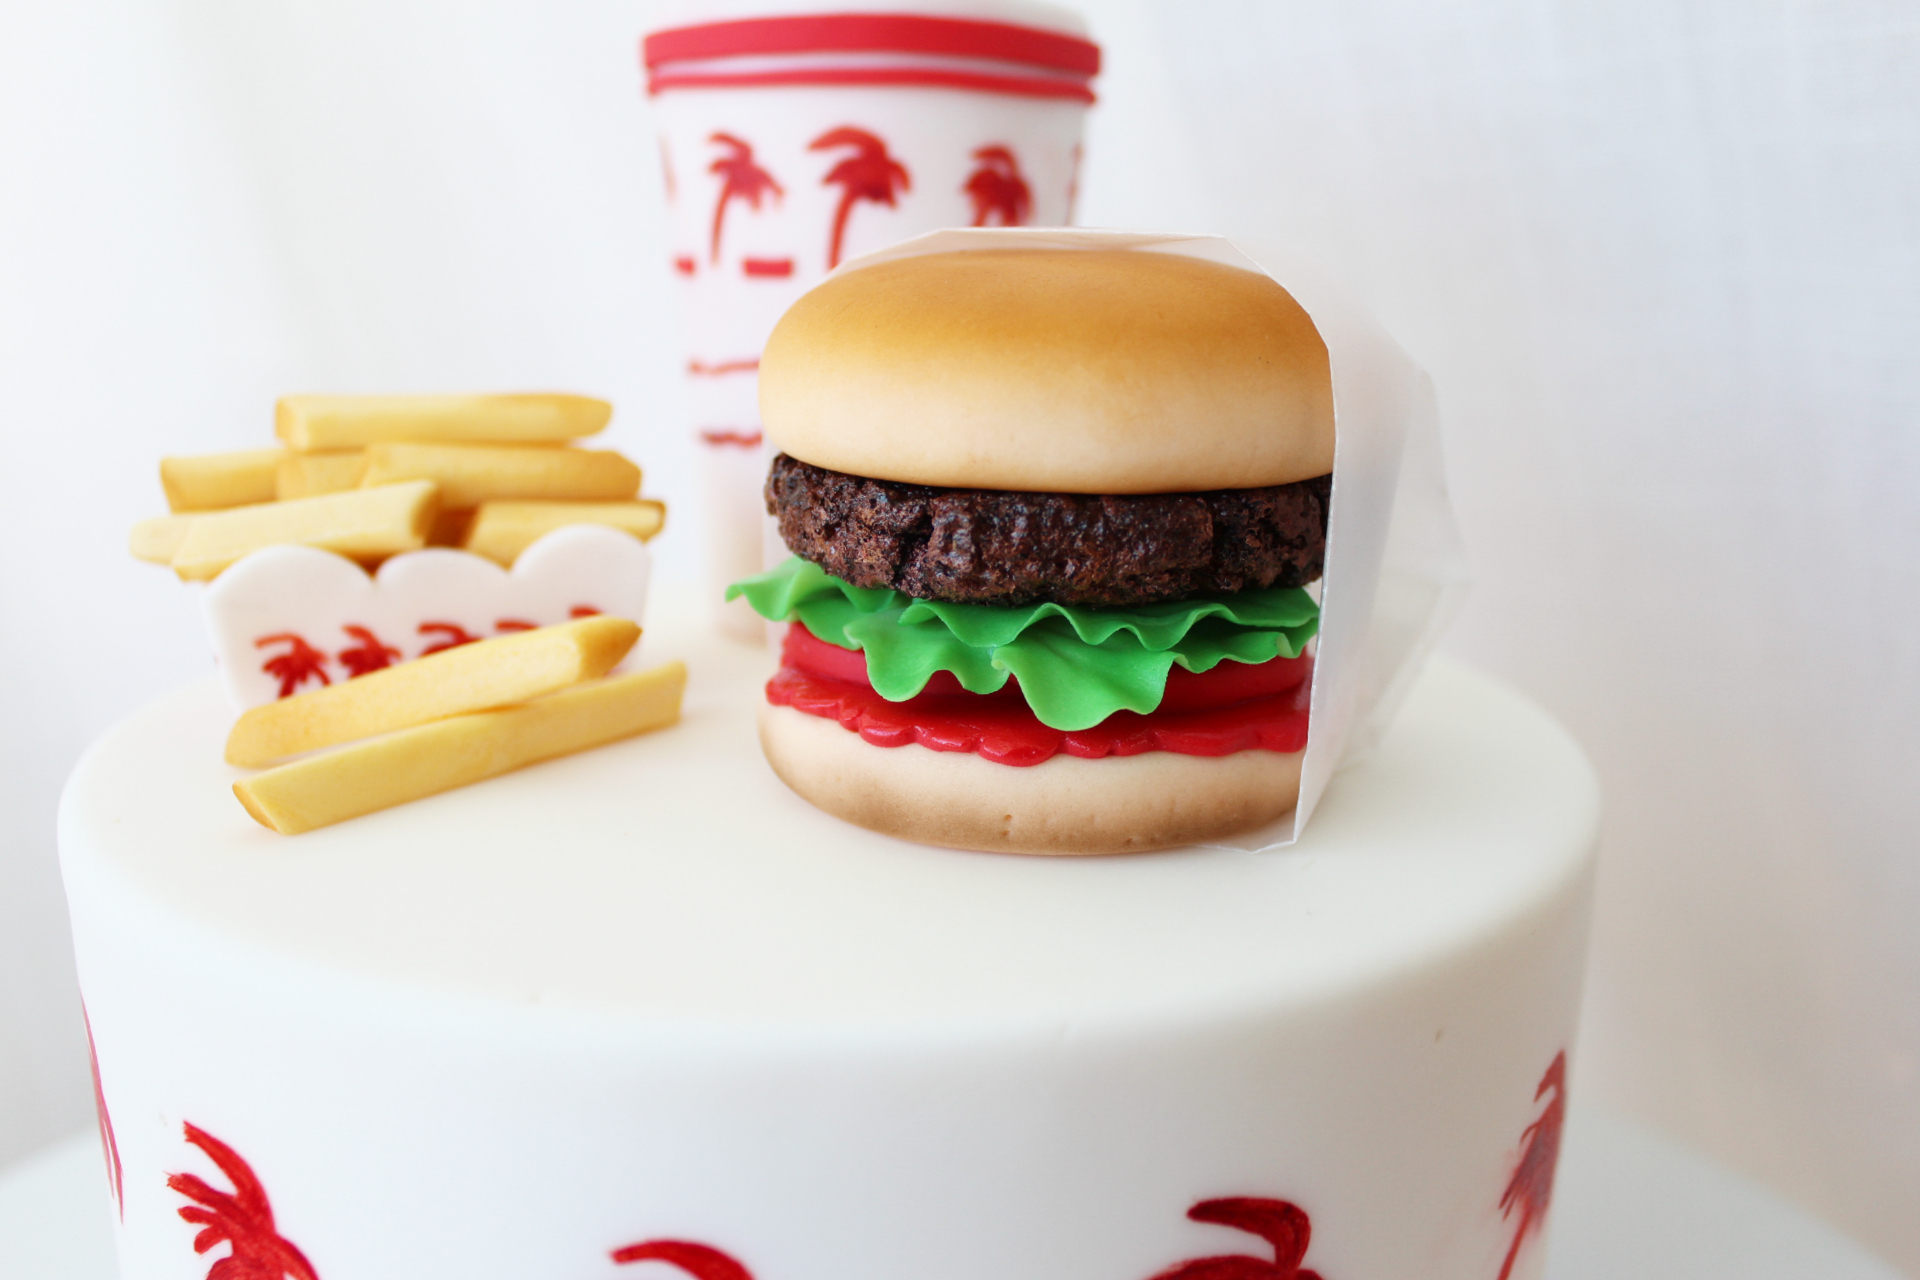 In n Out burger